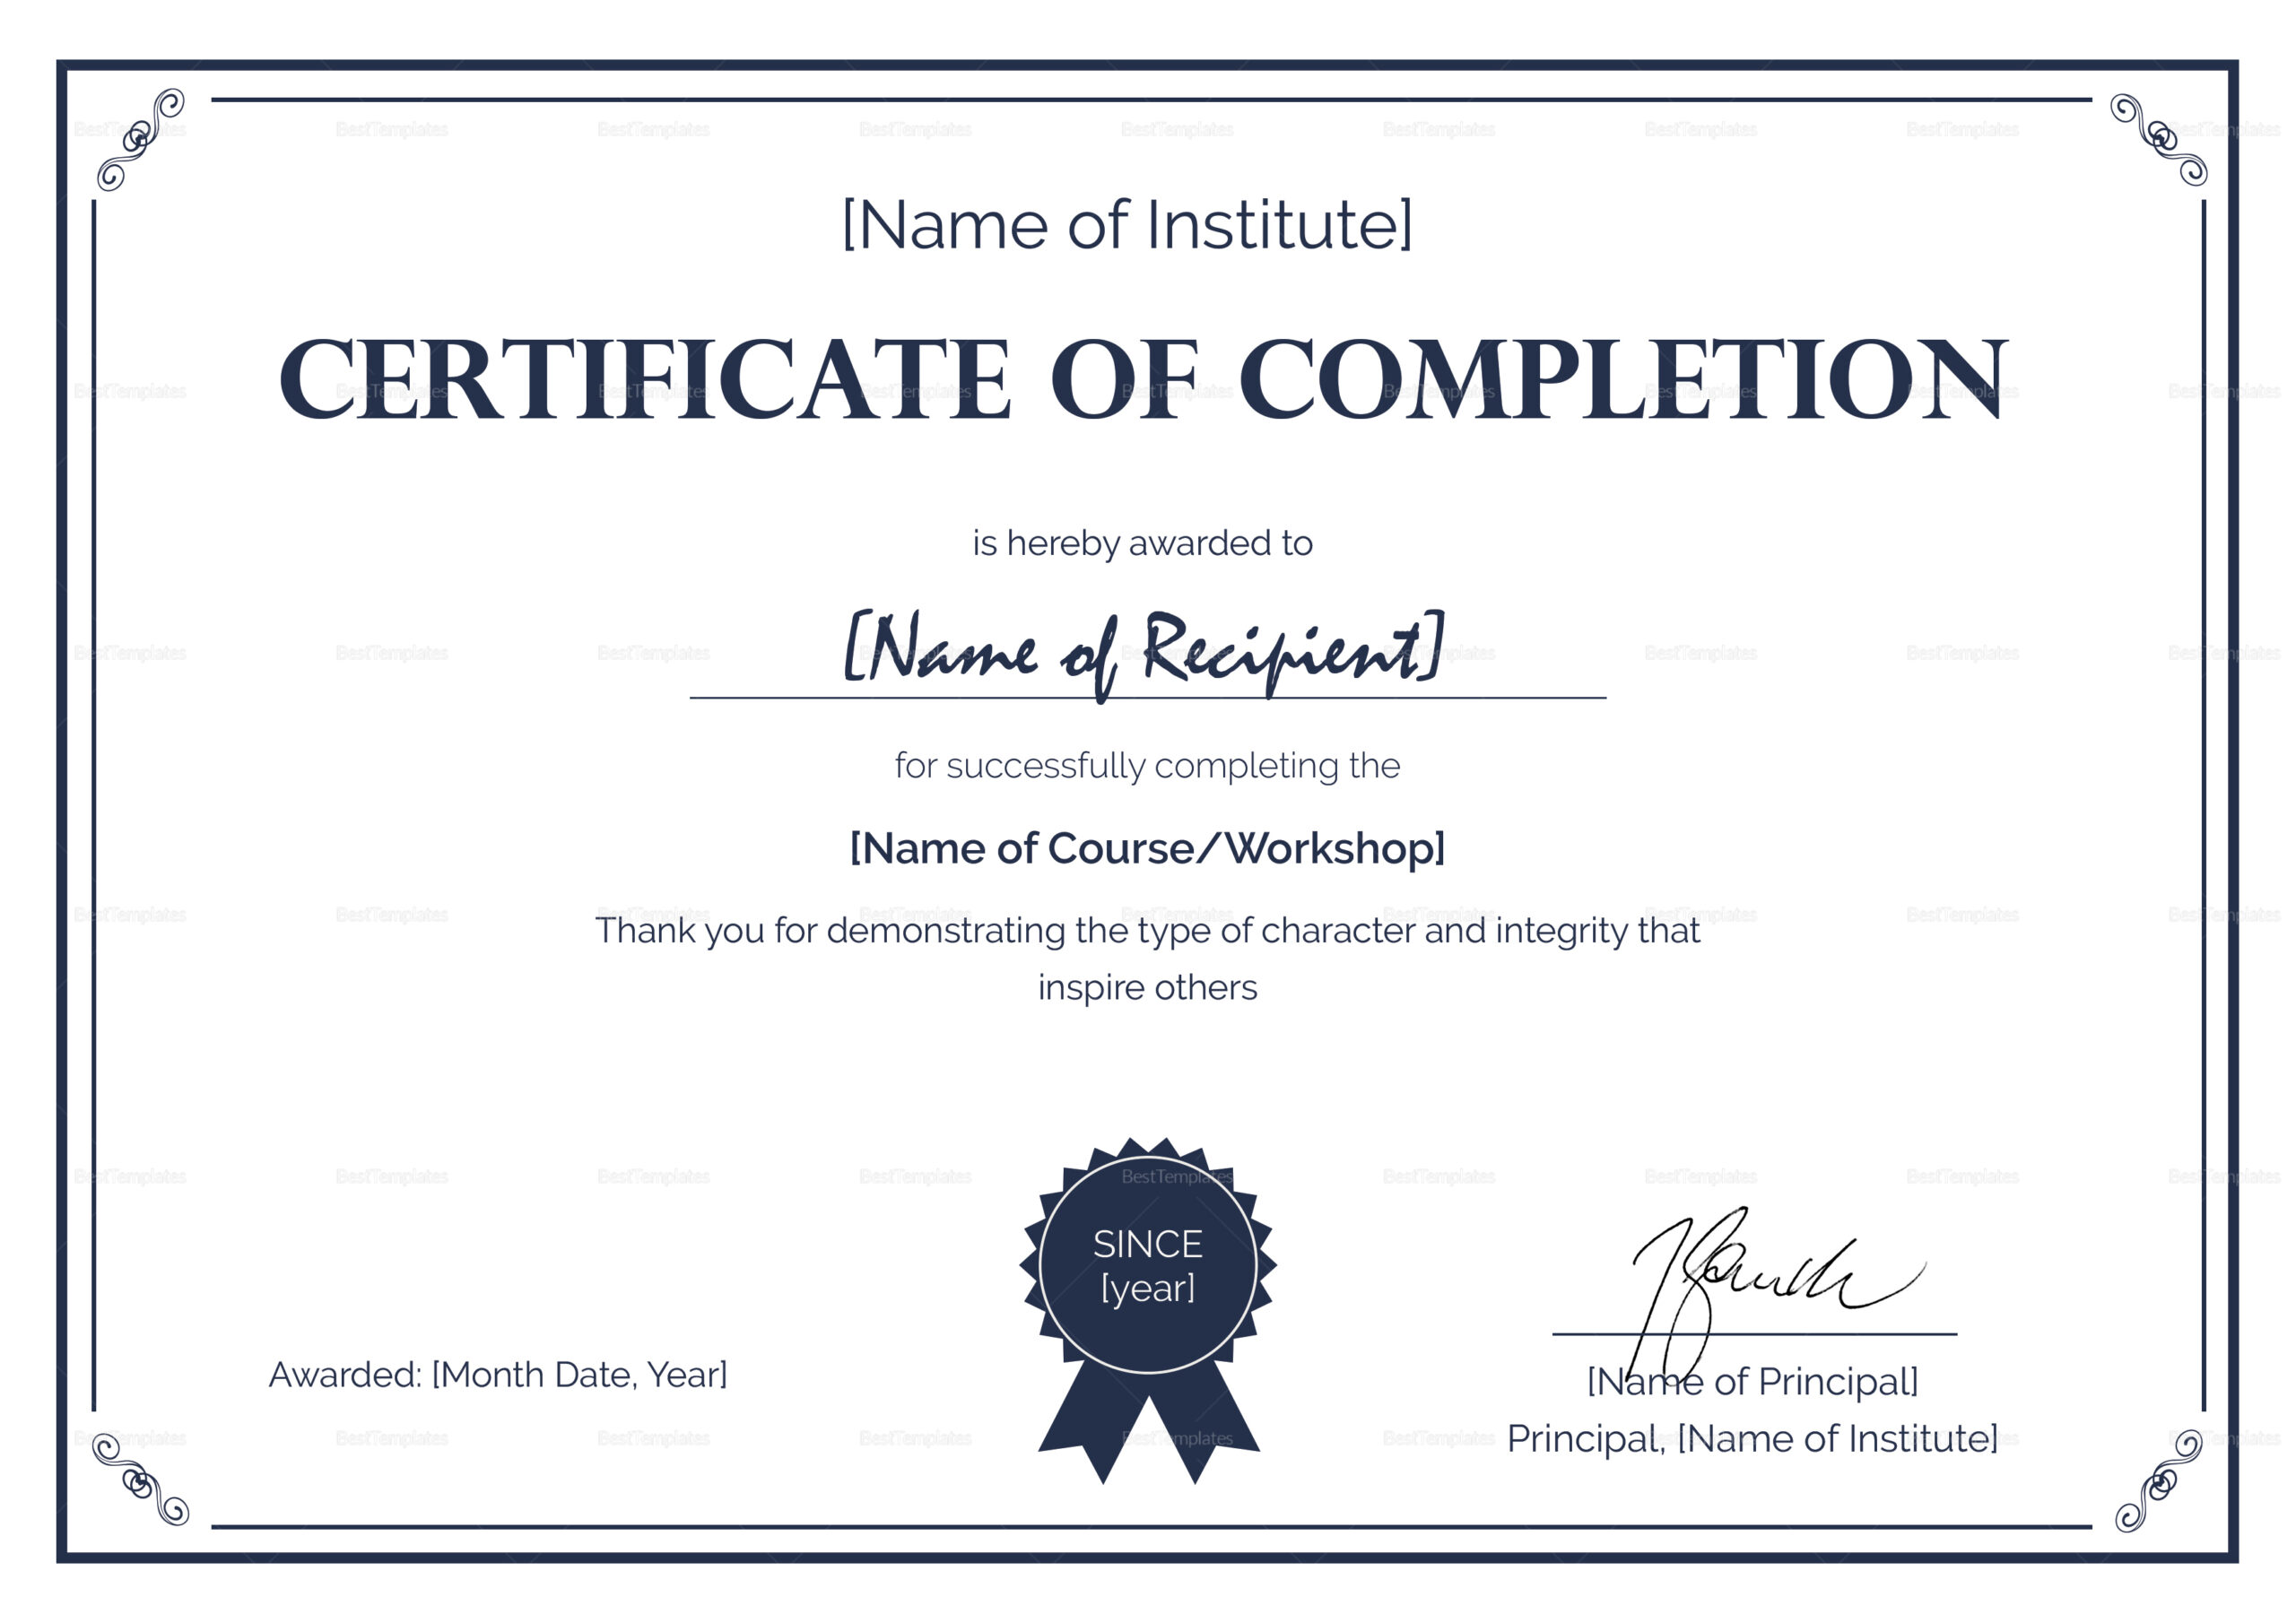 Formal Completion Certificate Design Template in PSD, Word Pertaining To Certificate Of Completion Template Word